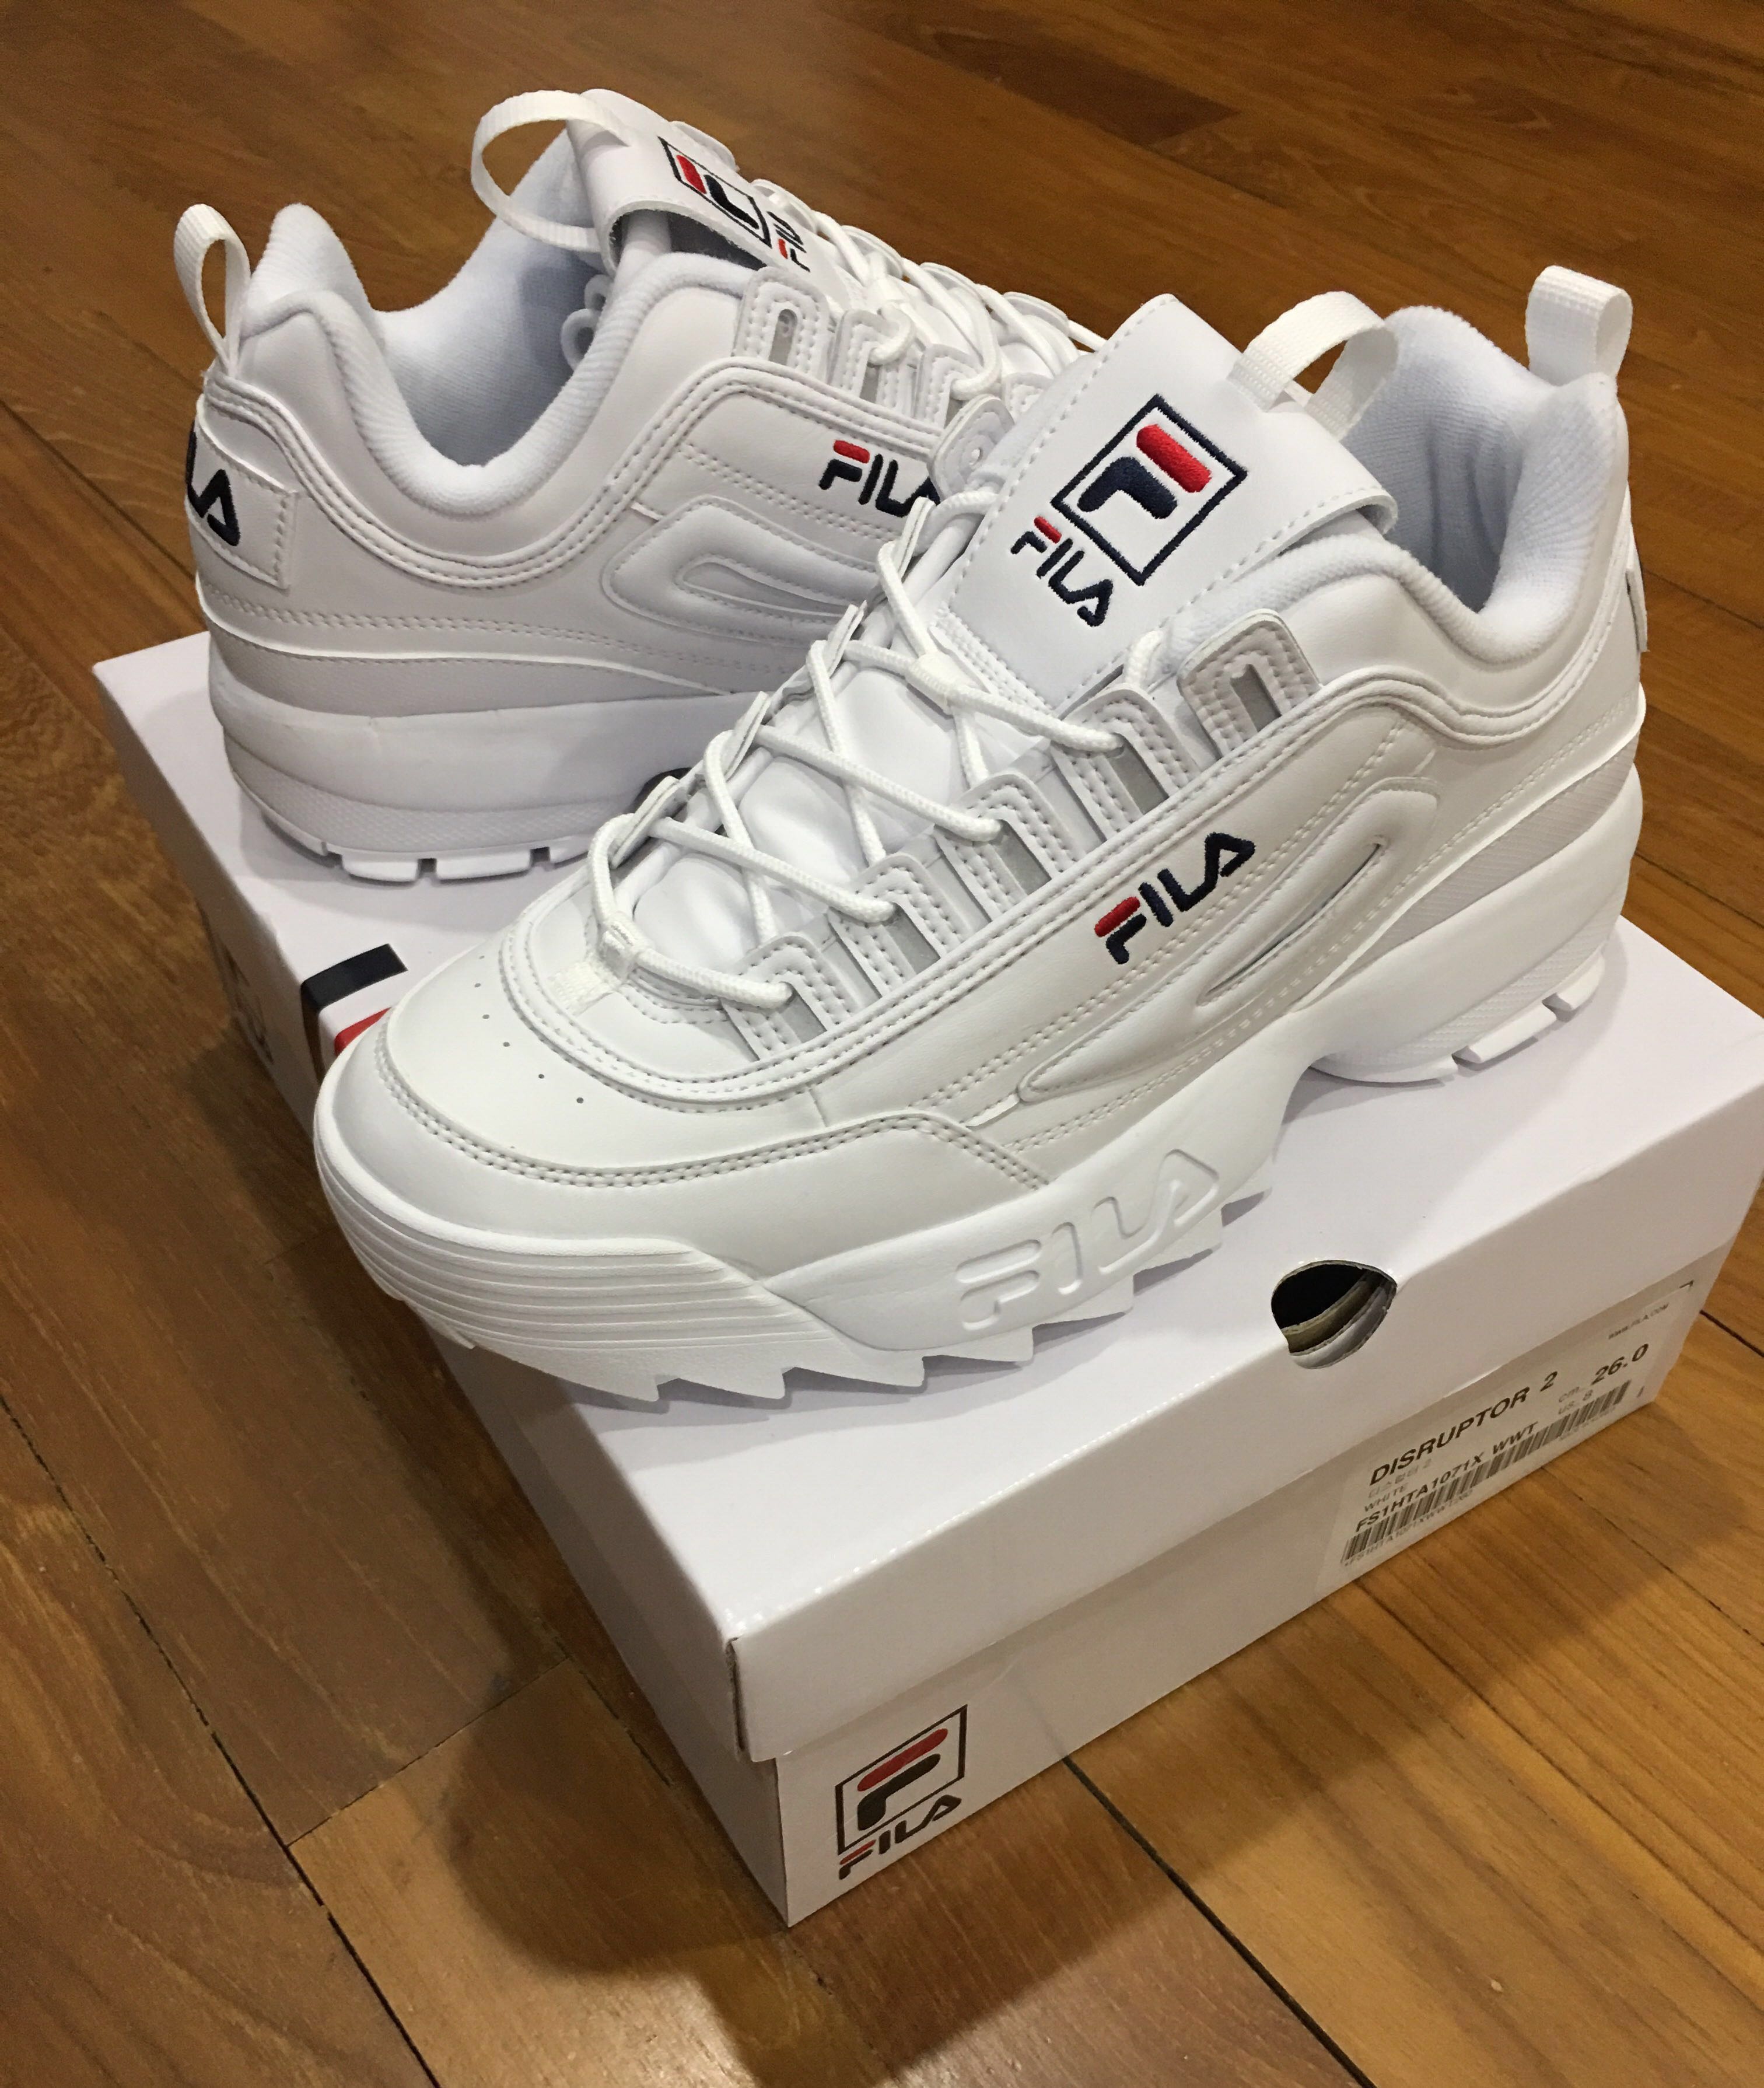 fila shoes true to size